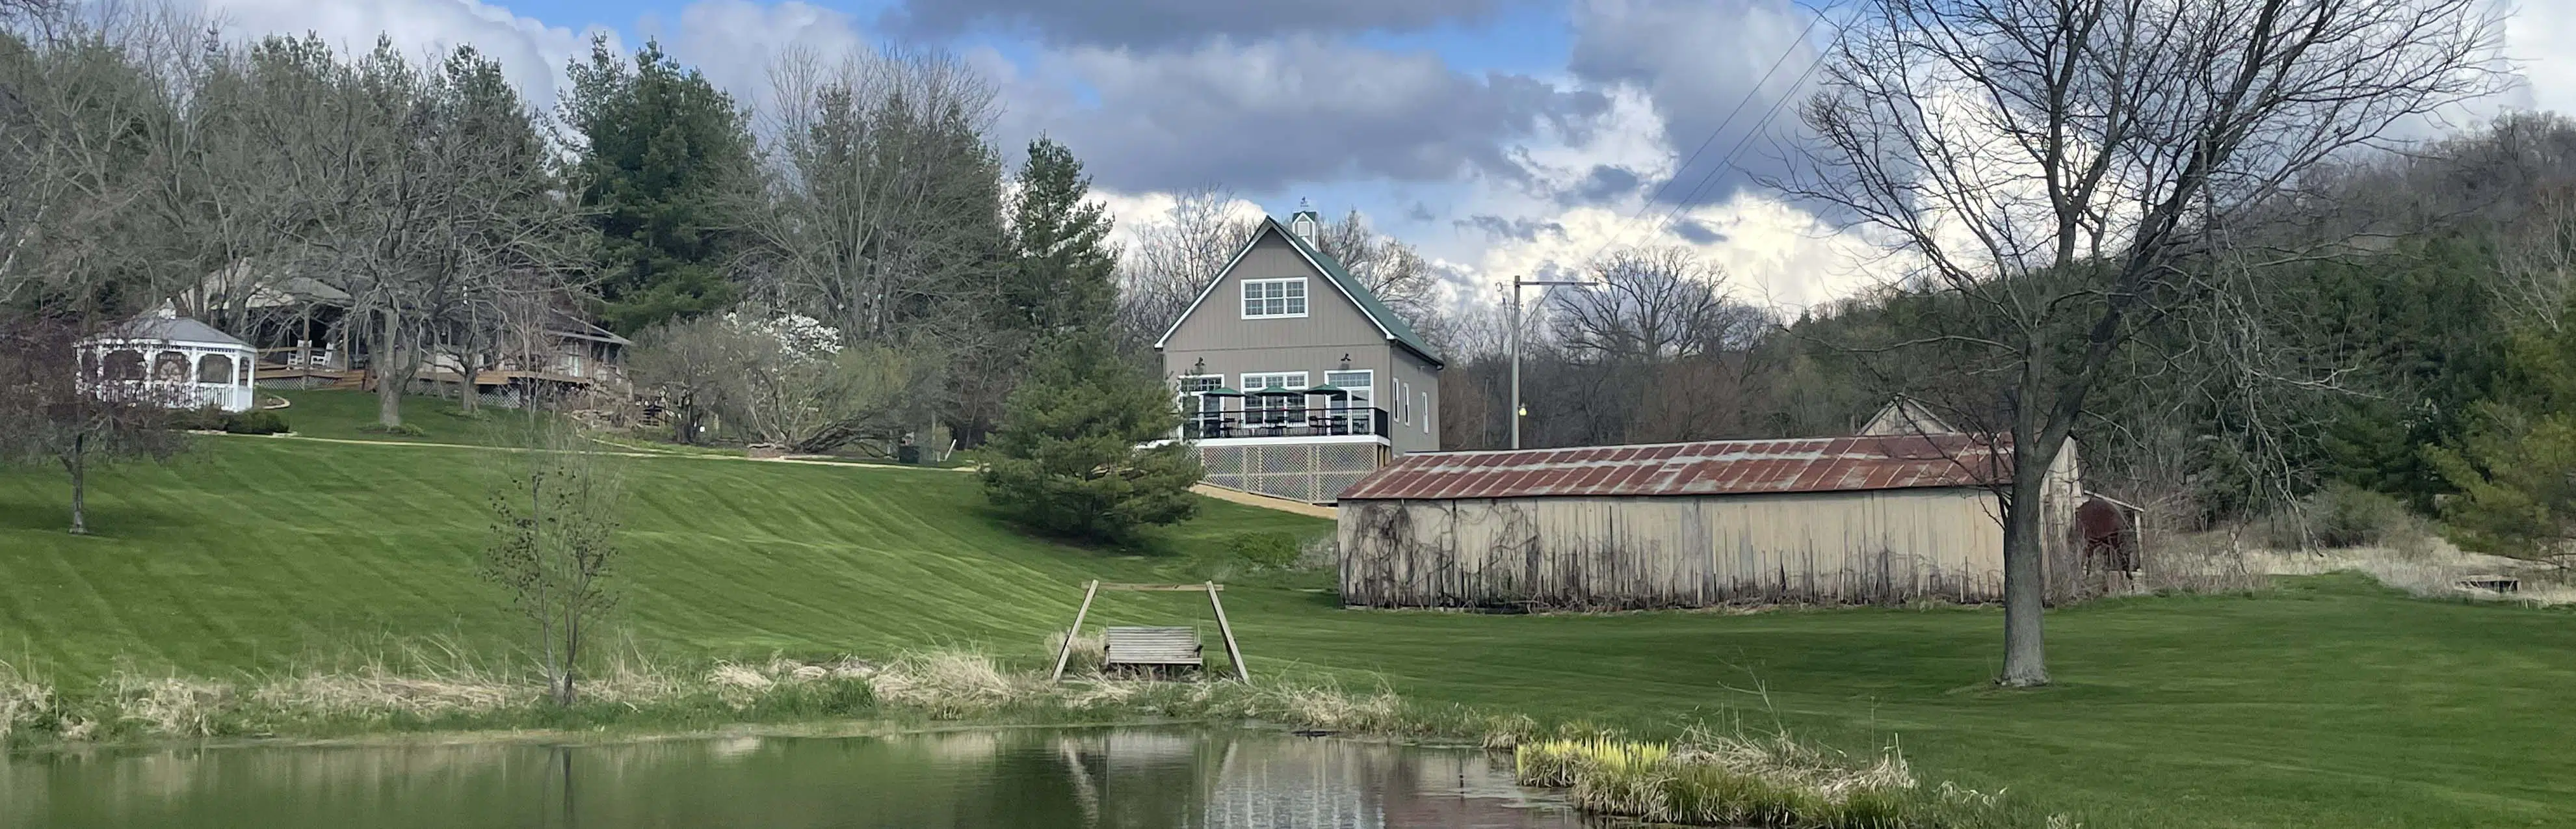 view from pond of barn and main house